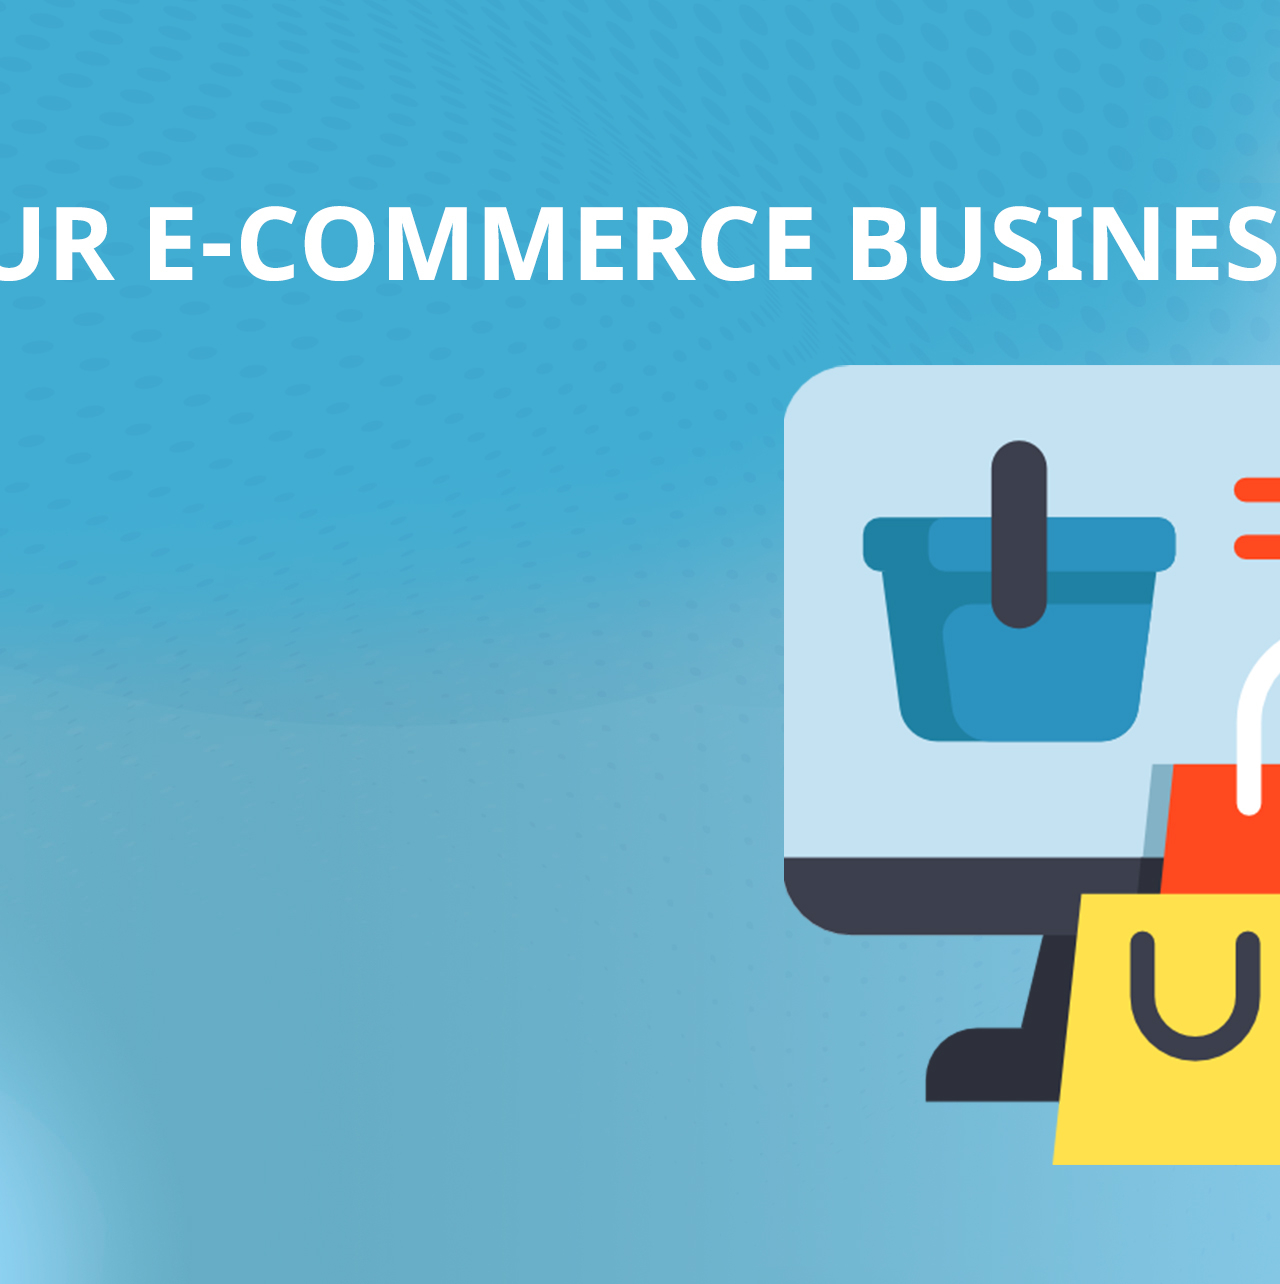 Setup your Ecommerce business with Kloudac